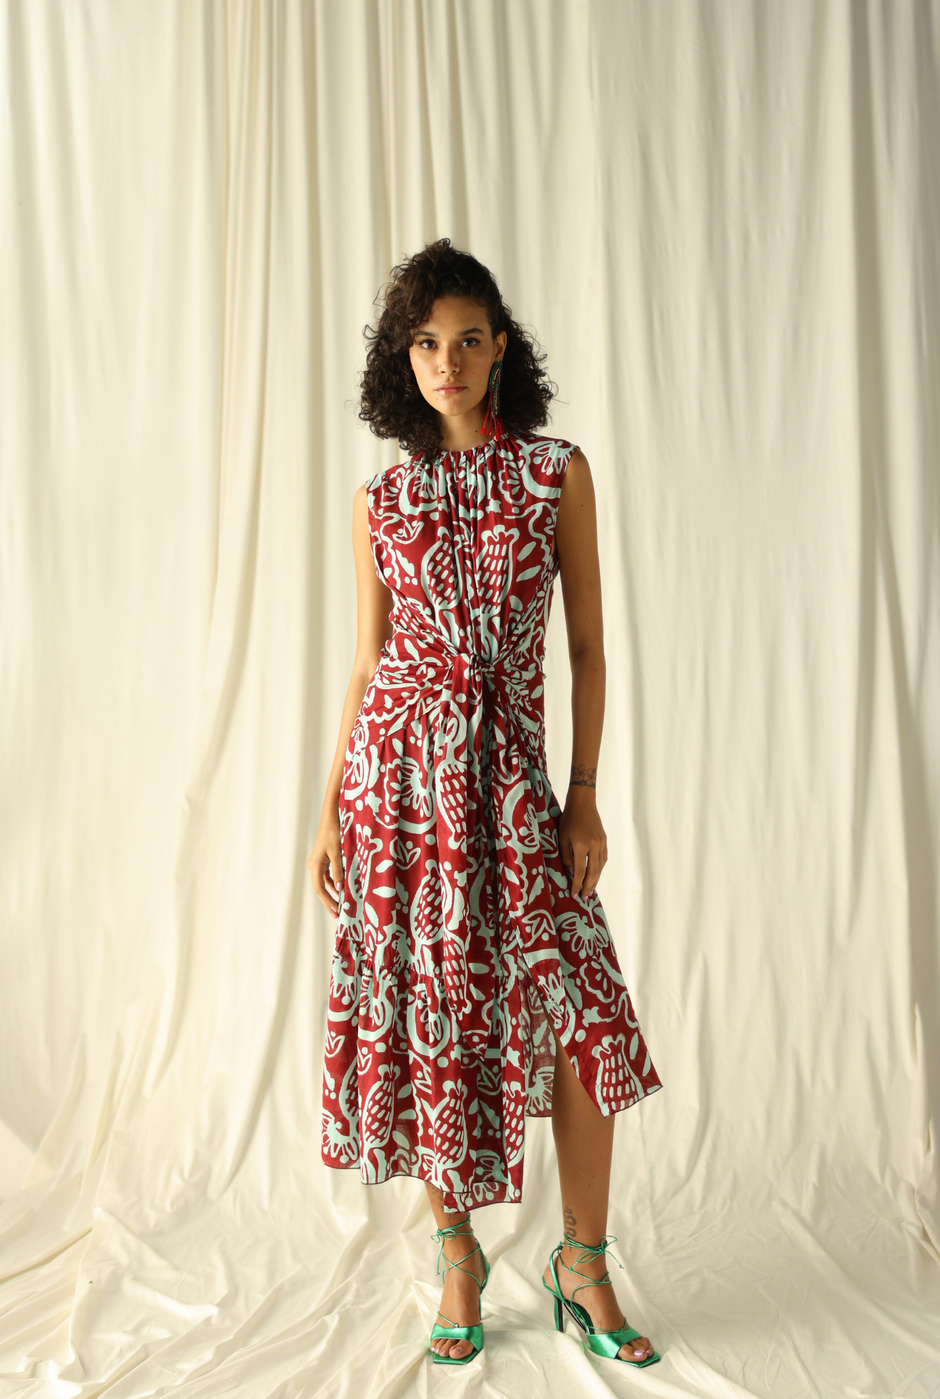 Shop handcrafted printed dresses | JODI Life – Page 3